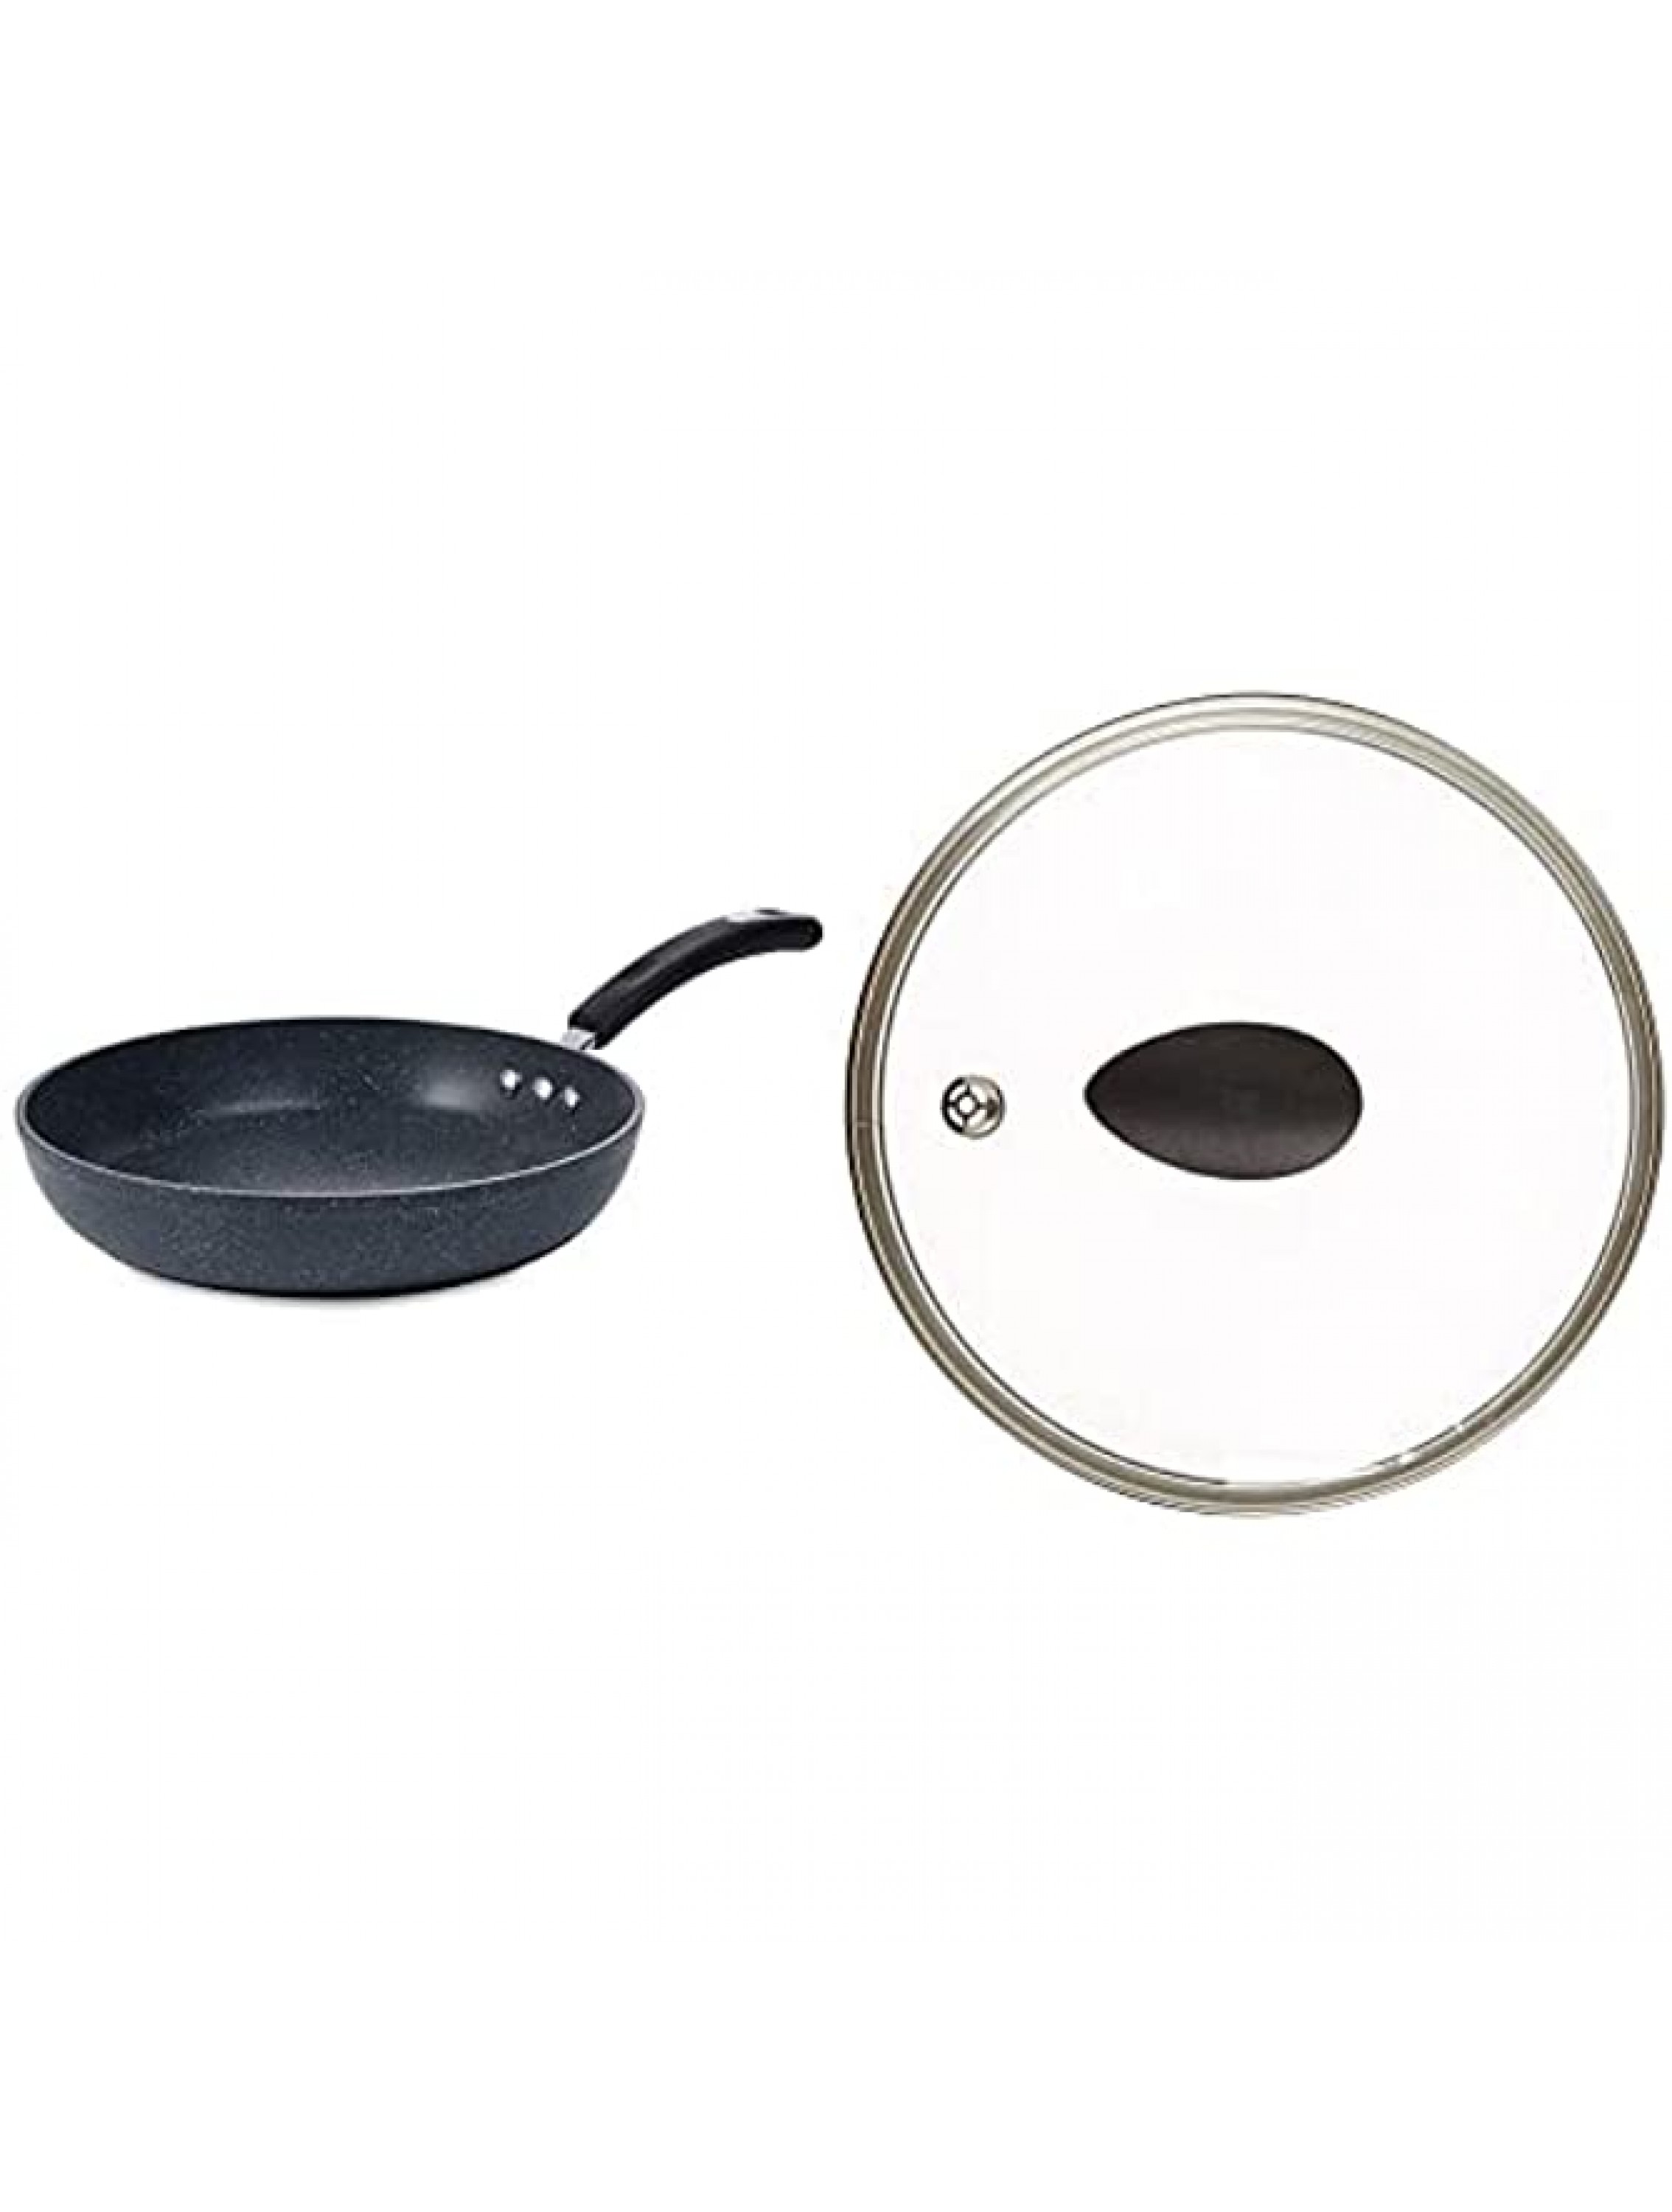 10 Stone Earth Frying Pan and Lid Set by Ozeri with 100% APEO & PFOA-Free Stone-Derived Non-Stick Coating from Germany - B31VWFW7G